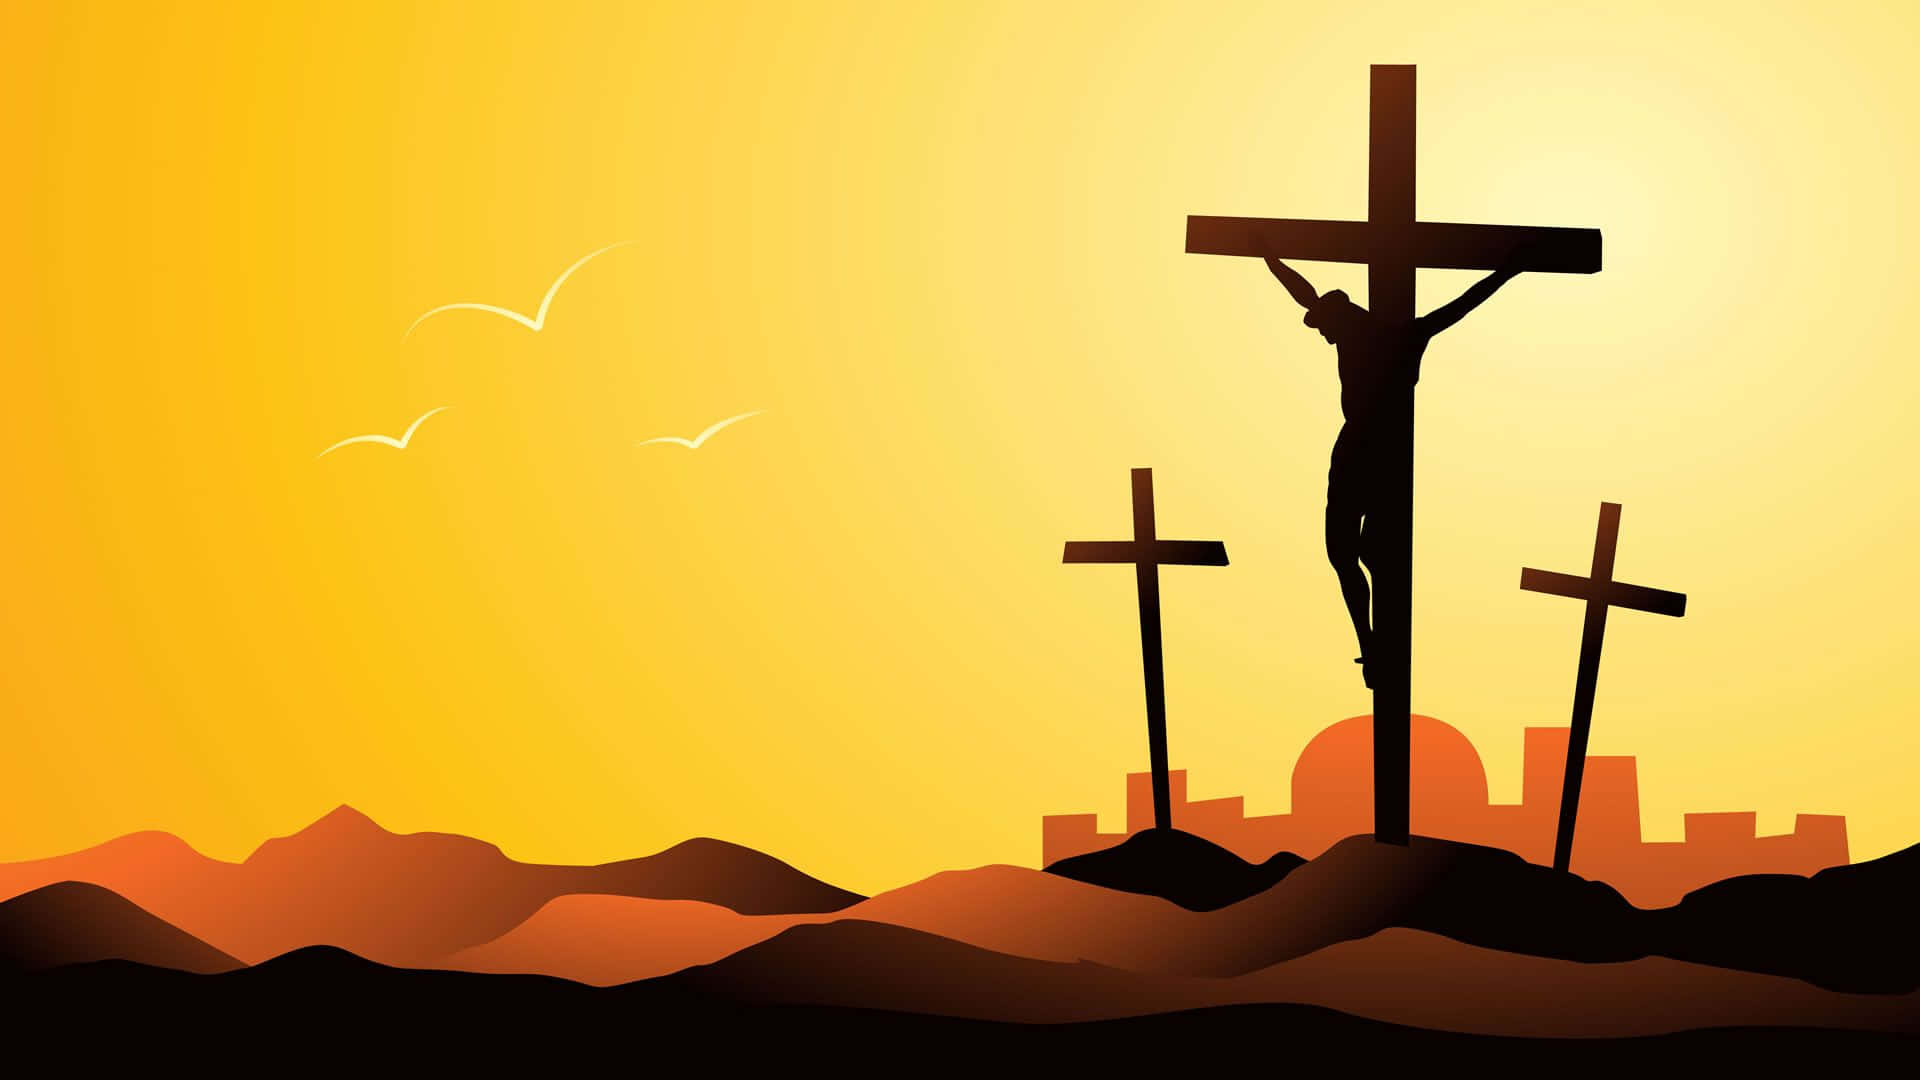 Jesus Crucified on the Cross Against a Dramatic Sky Wallpaper